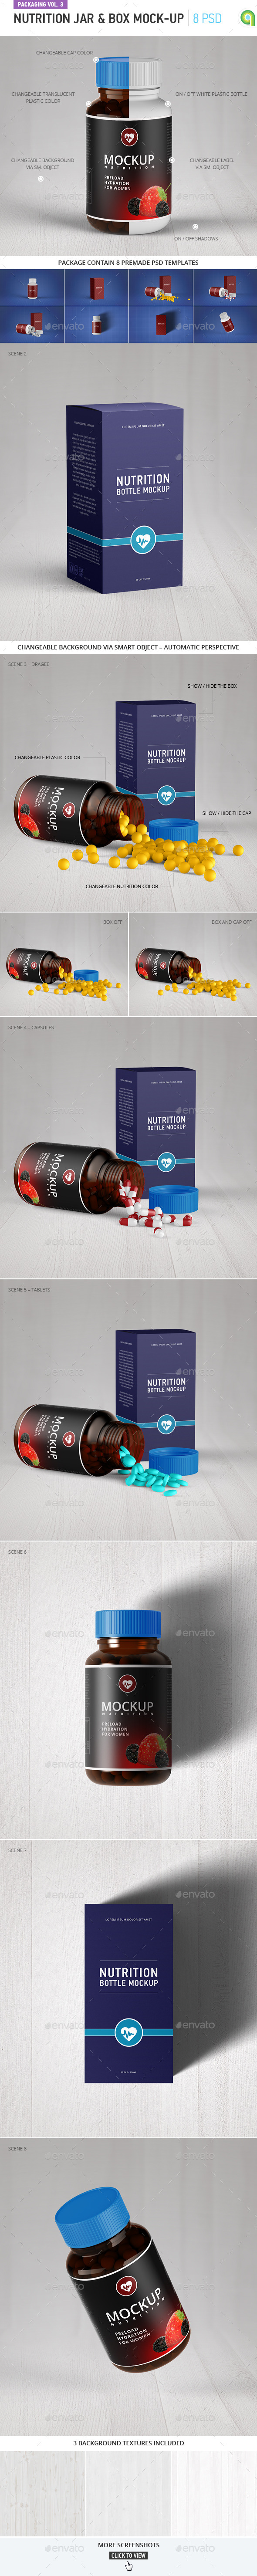 Download Nutrition Jar And Box Mock Up By Ayashi Graphicriver